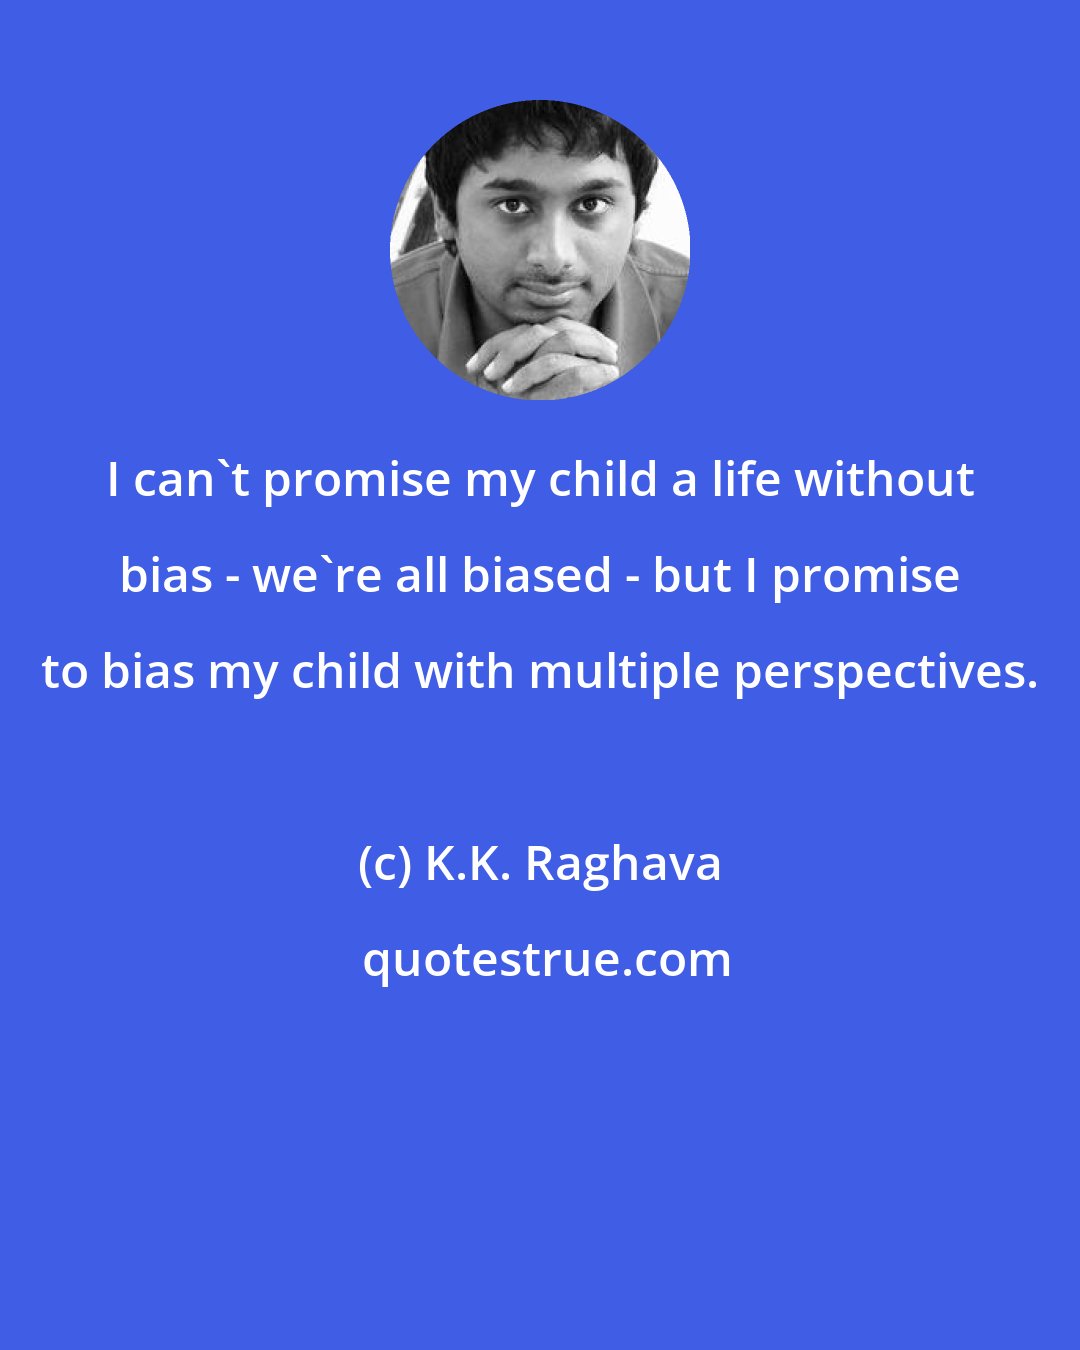 K.K. Raghava: I can't promise my child a life without bias - we're all biased - but I promise to bias my child with multiple perspectives.